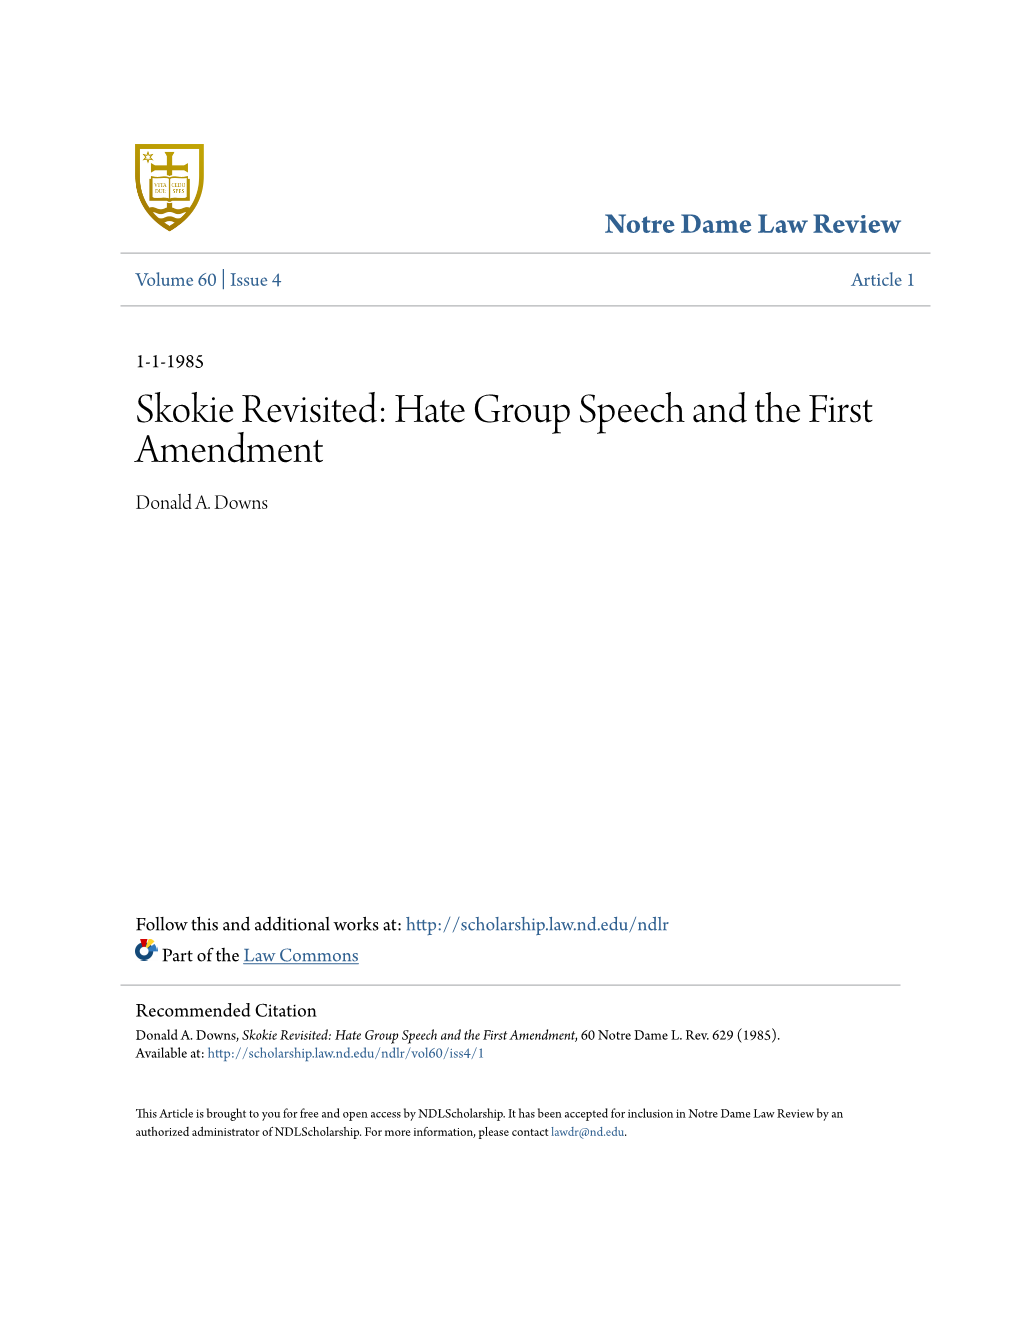 Skokie Revisited: Hate Group Speech and the First Amendment Donald A